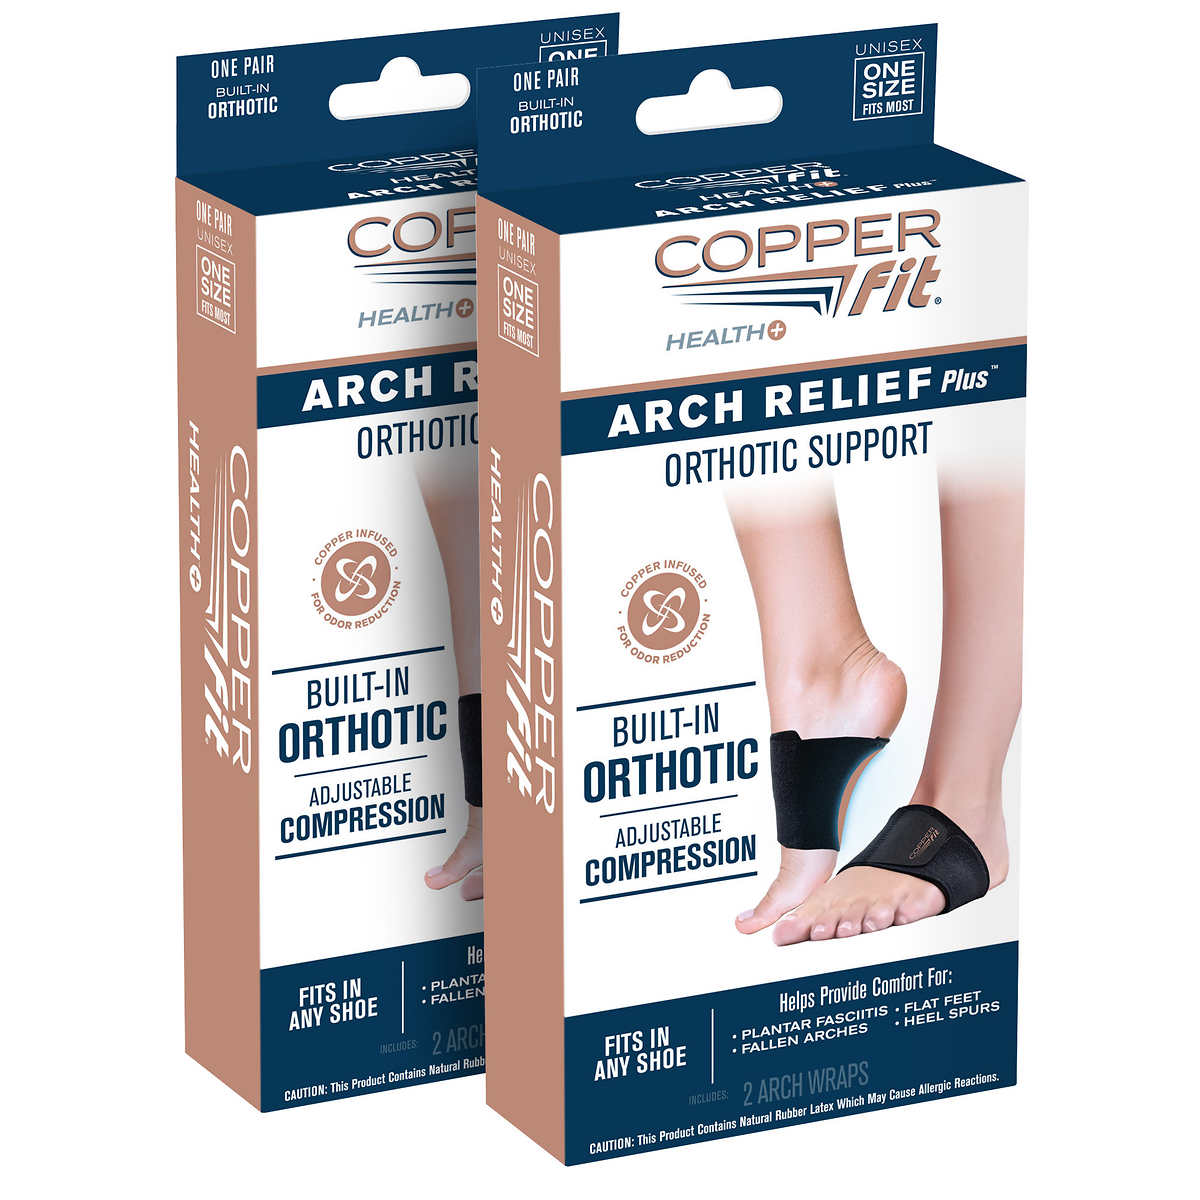 Copper Fit Rapid Relief Back Support 3 In 1 One Size Hot/Cold Therapy/Gel  Pack